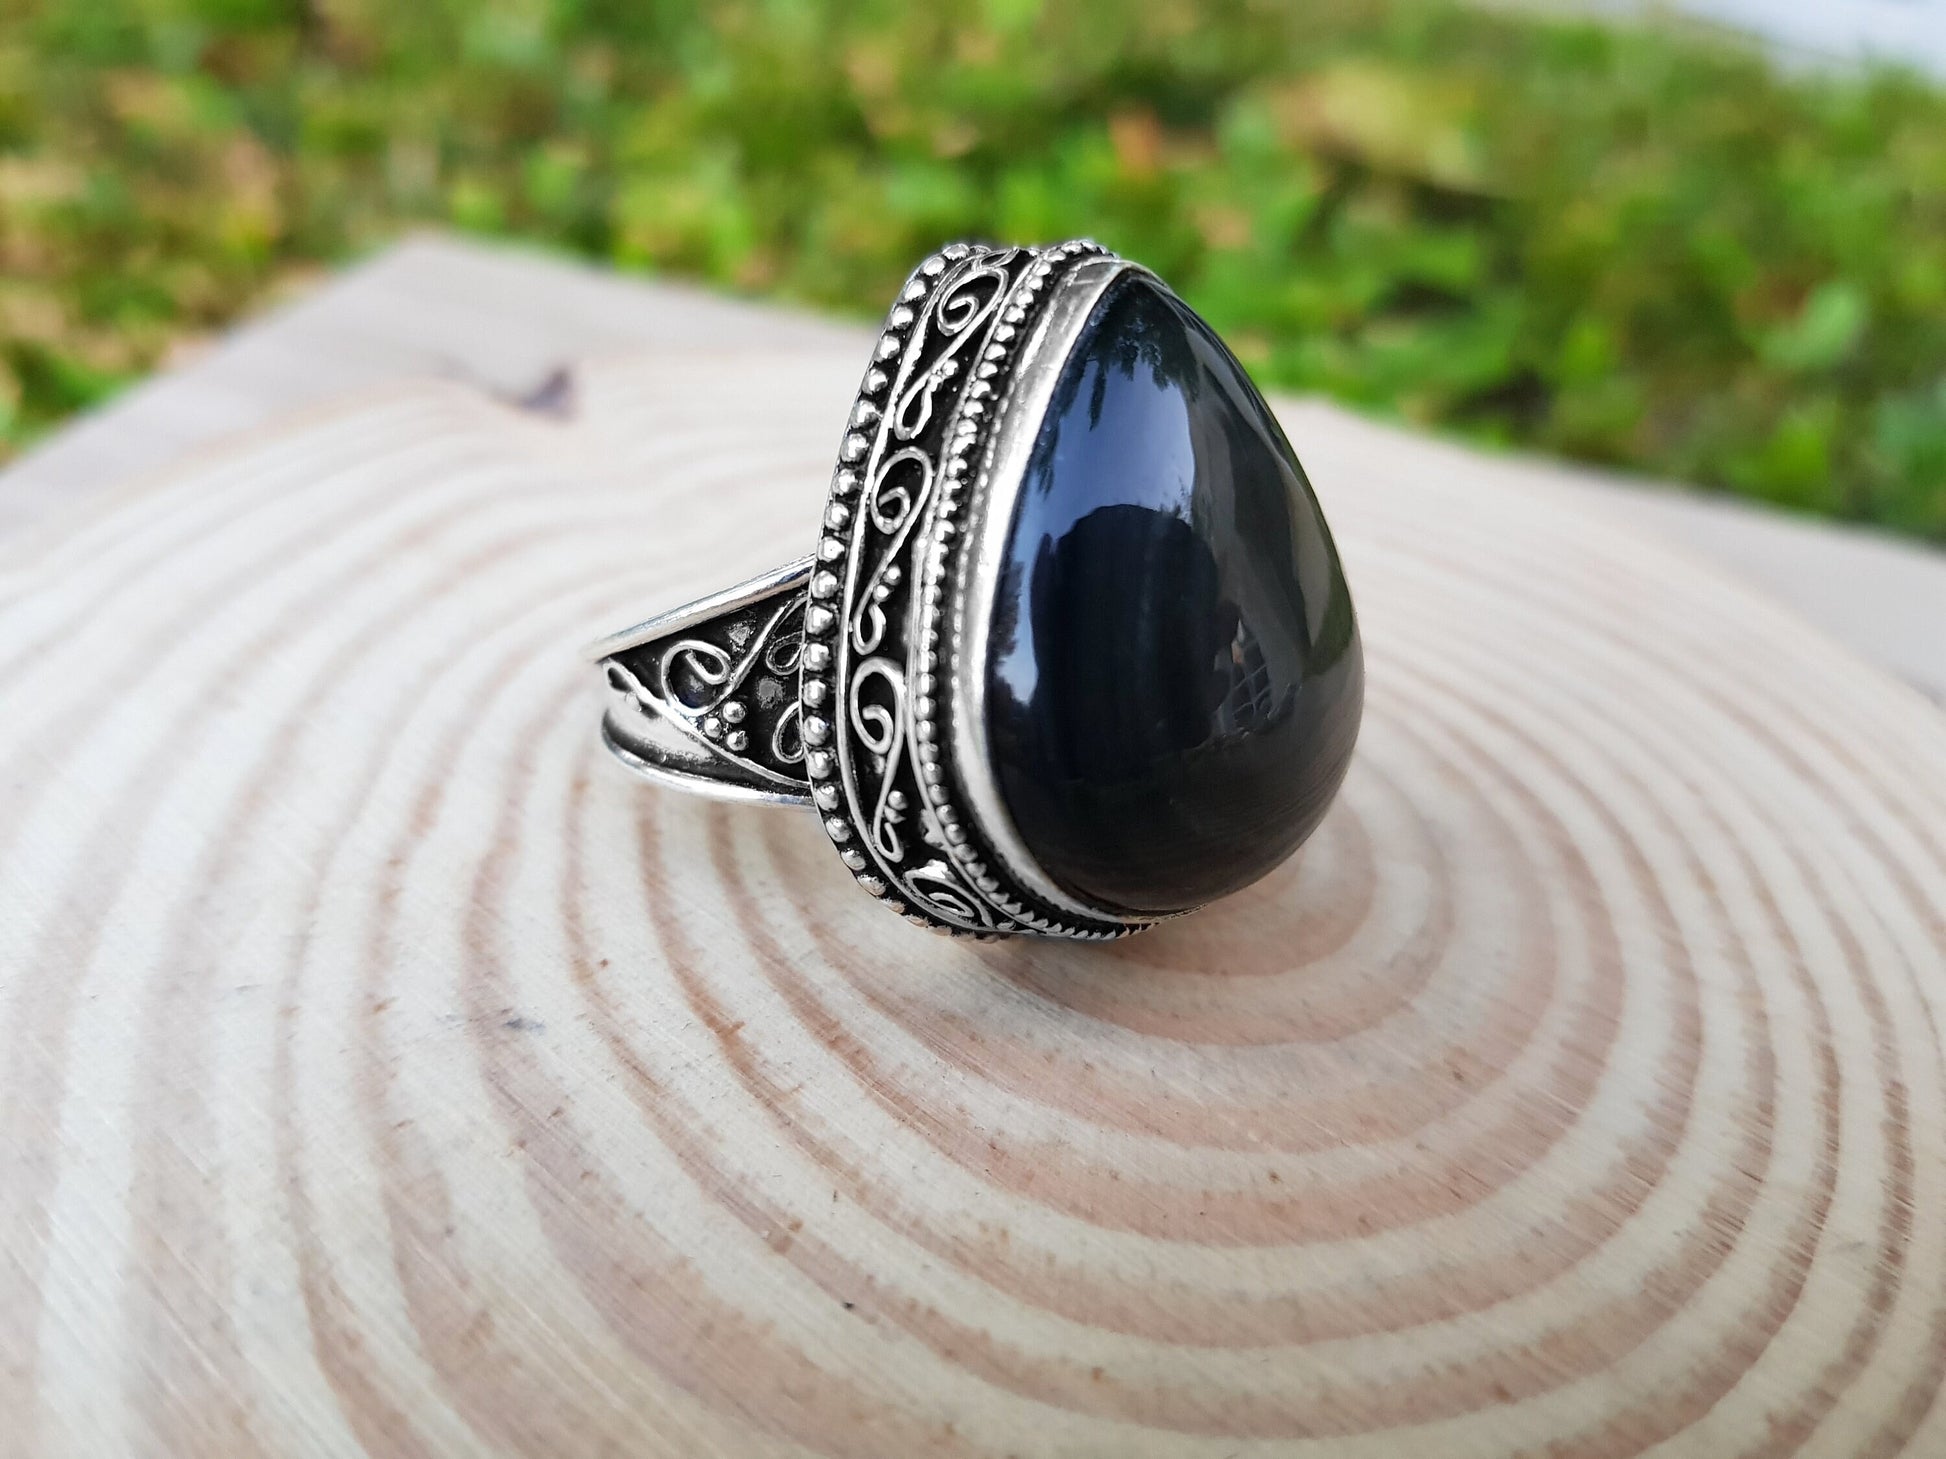 Black Onyx Statement Ring In Sterling Silver Size US 7 1/2 Gothic Boho Ring Unique Gift For Women